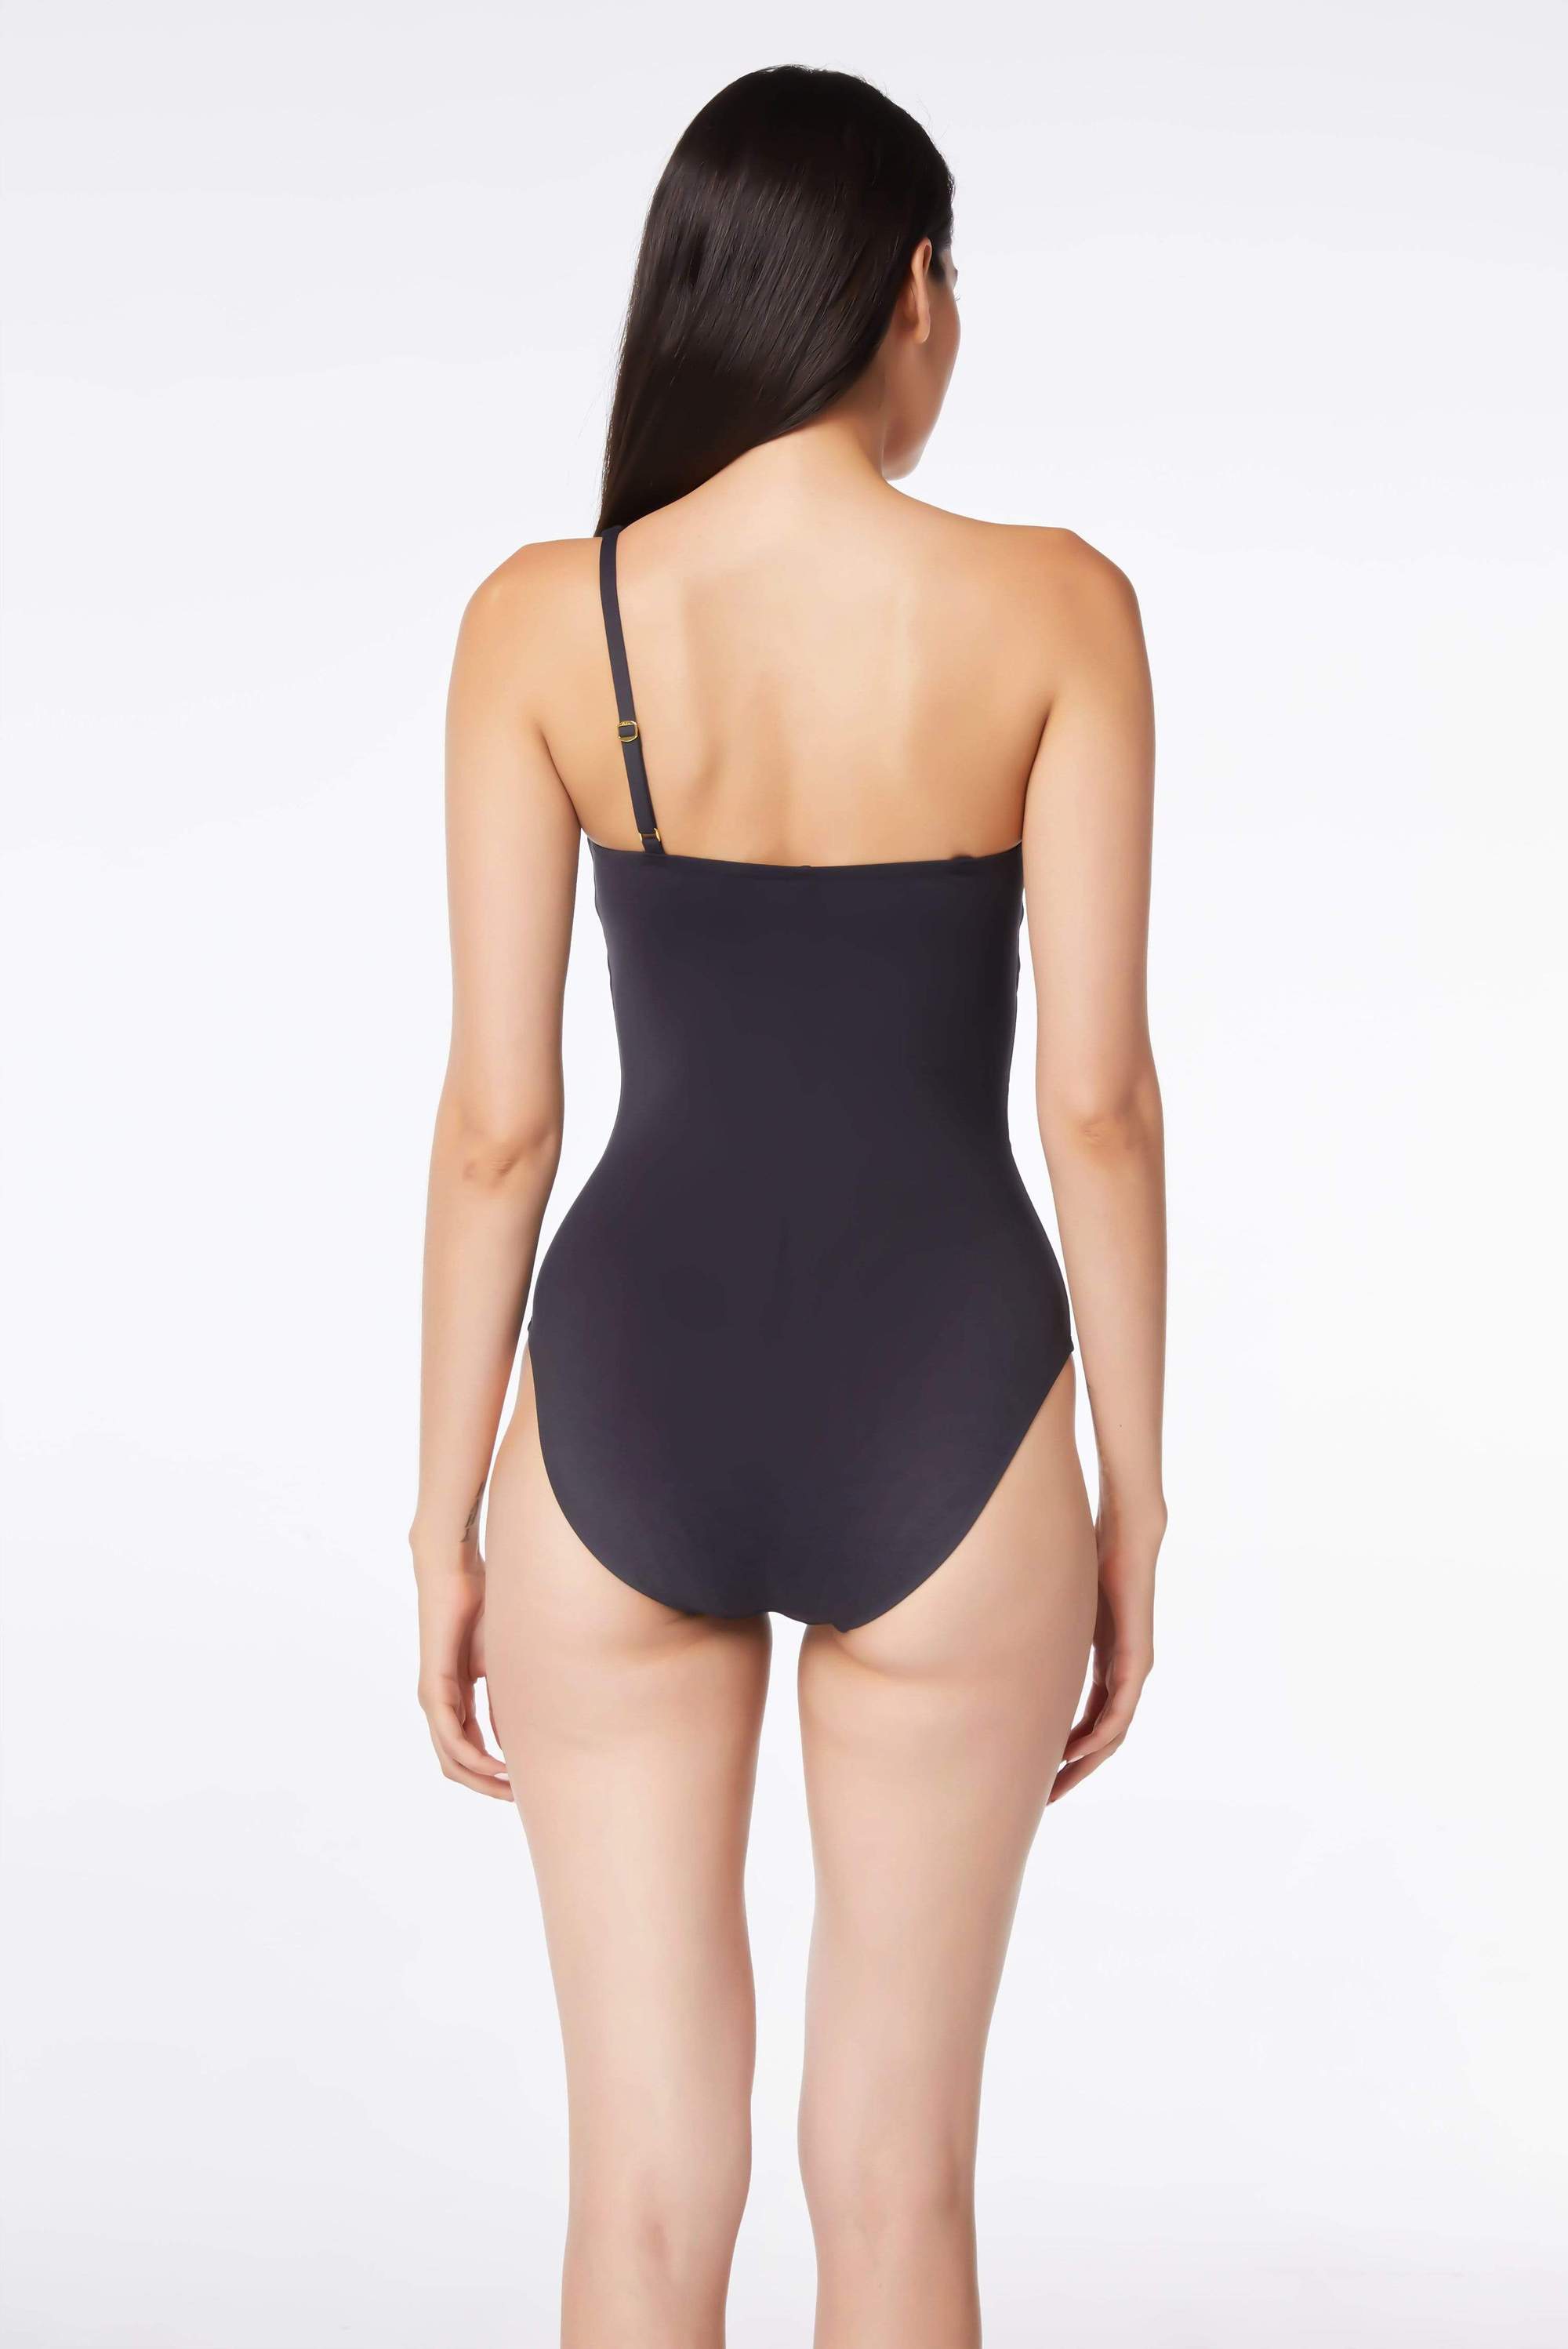 BLEU ROD BEATTIE Don't Mesh With Me High Neck One-piece Swimsuit